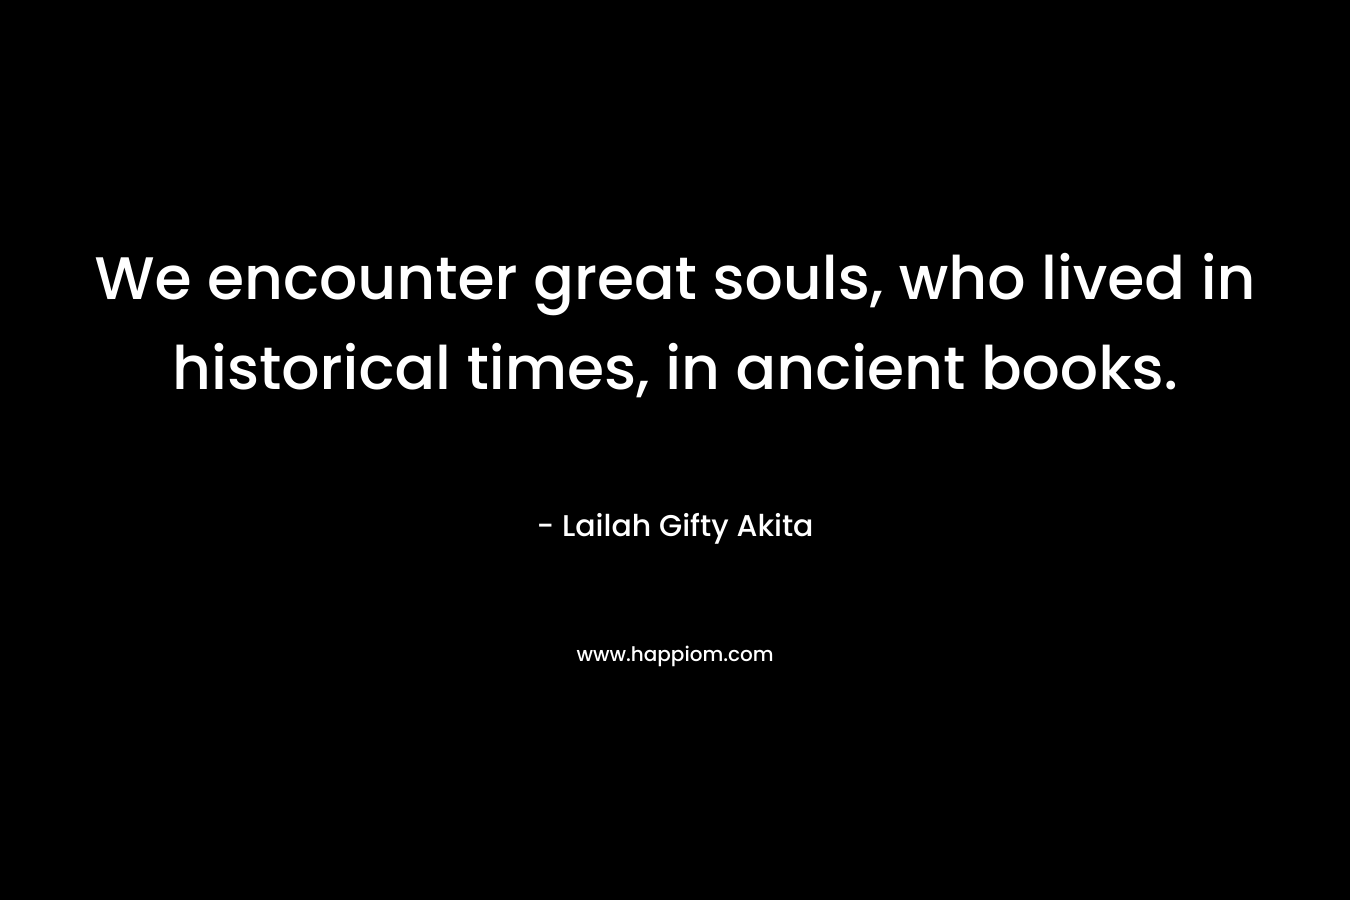 We encounter great souls, who lived in historical times, in ancient books.